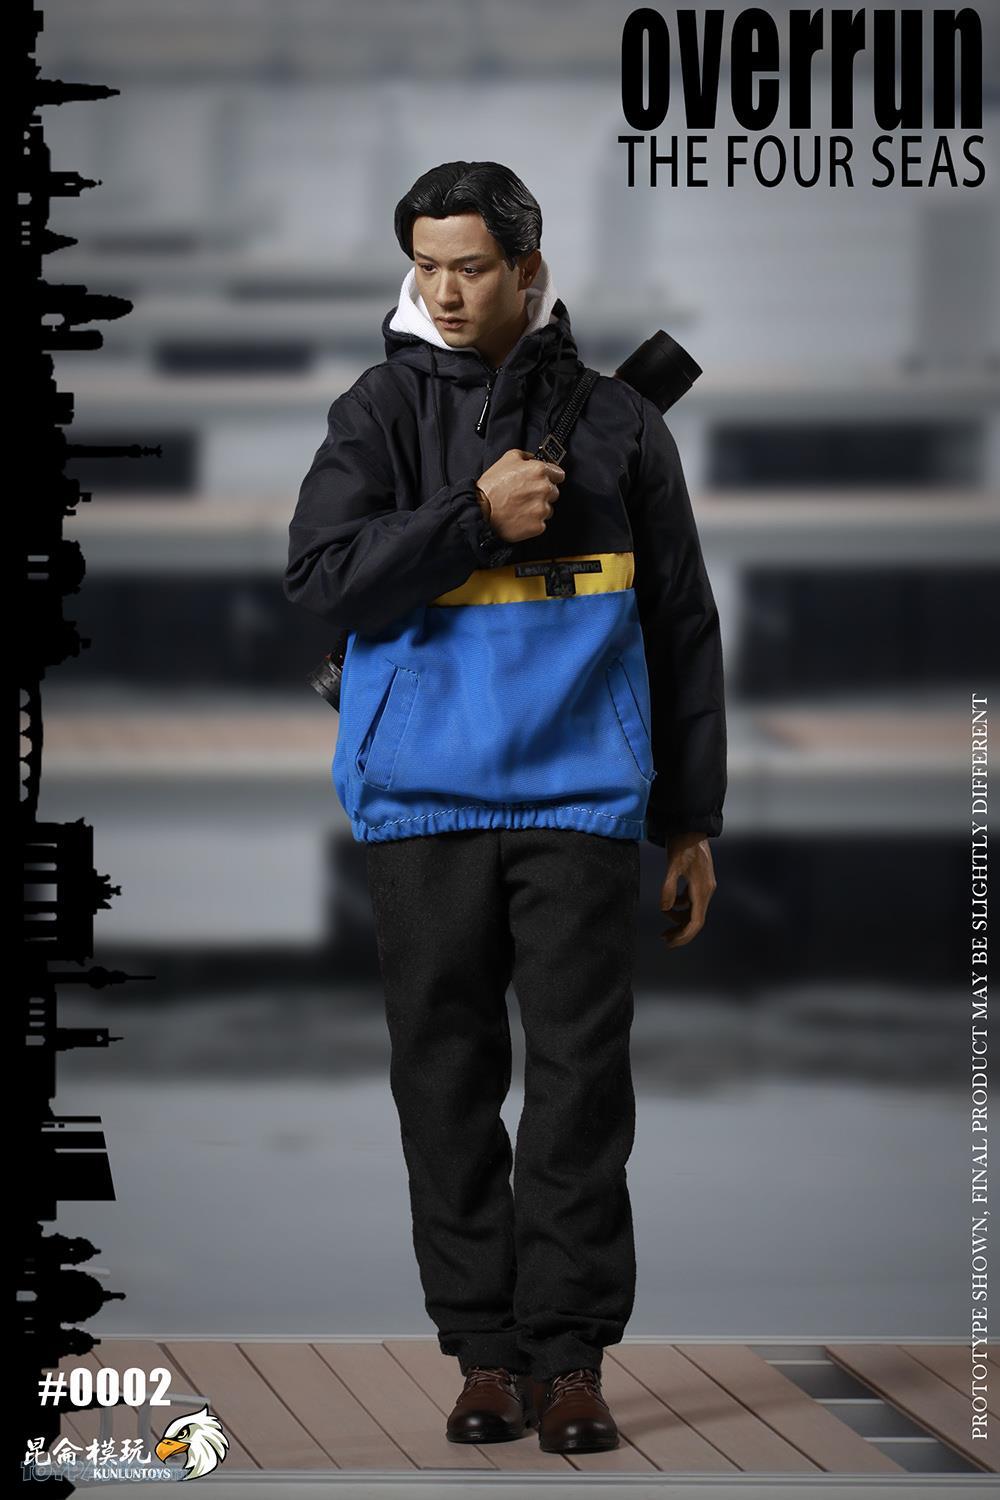 NEW PRODUCT: 1/6th scale Overrun The Four Seas Action Figure  From KunLunToys  Code: KLT10002 33120113